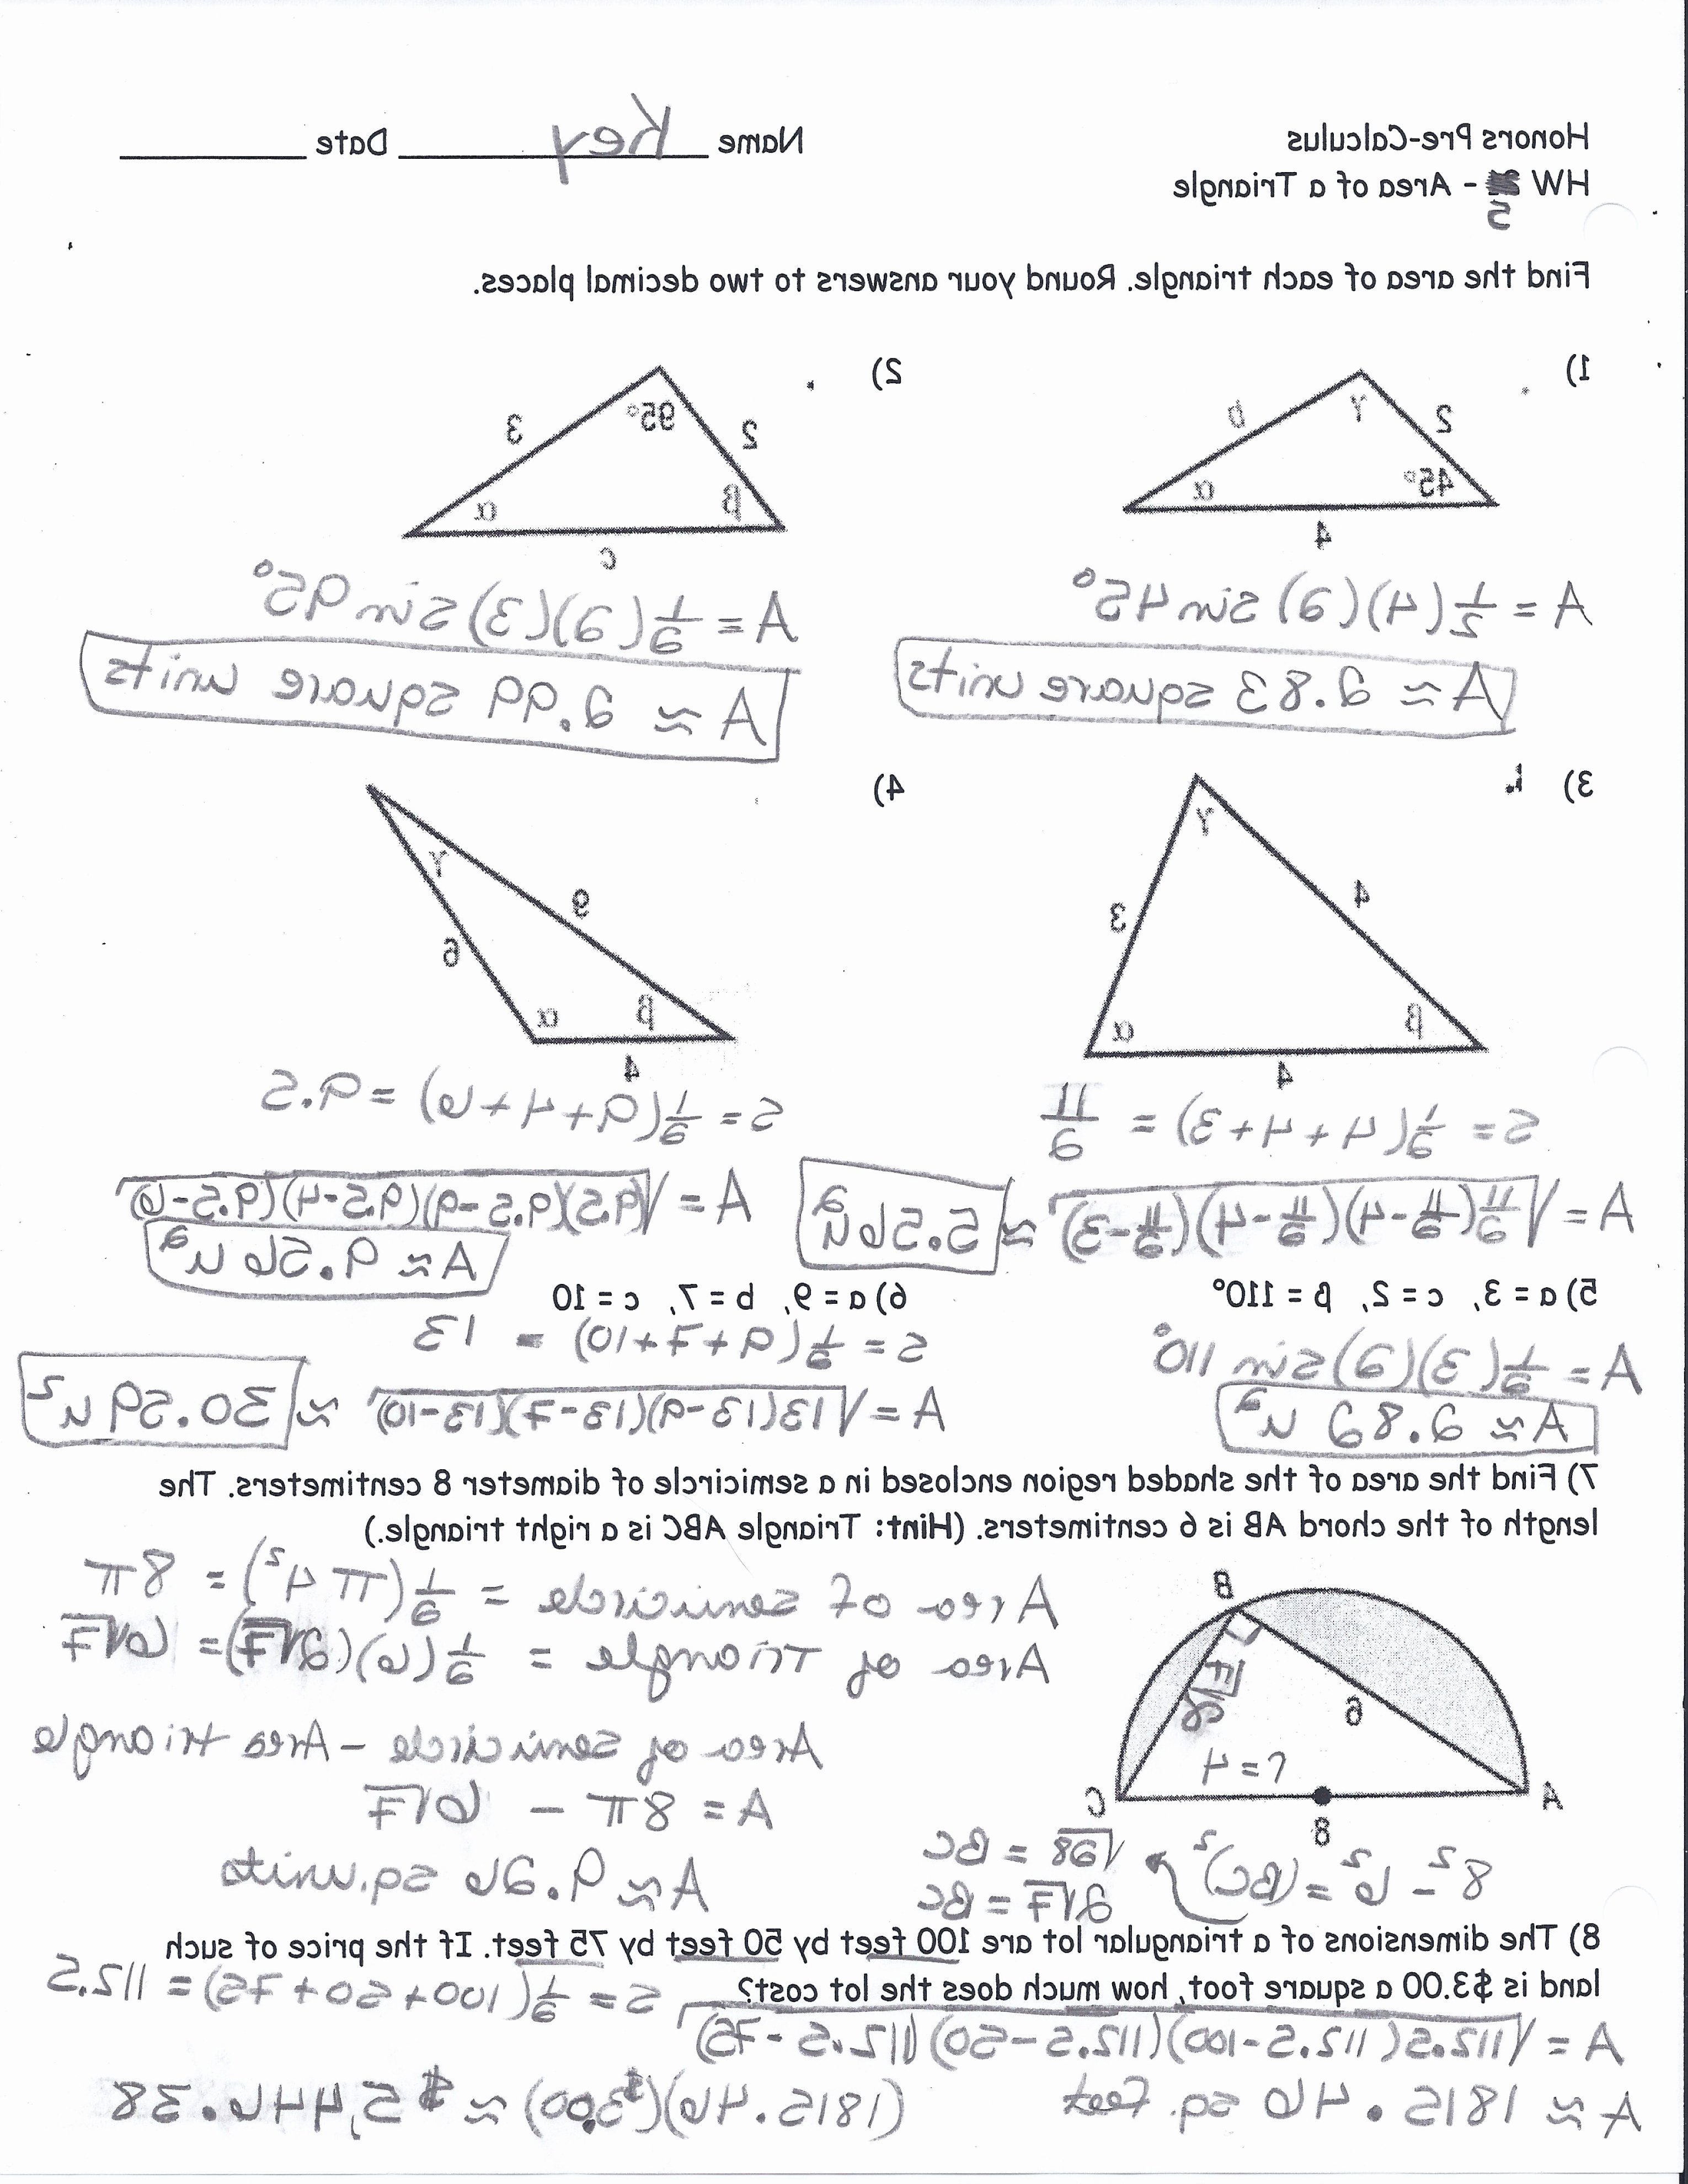 Right Triangle Trigonometry Worksheet Answers Inspirational Right Triangle Trigonometry Worksheet with Answers